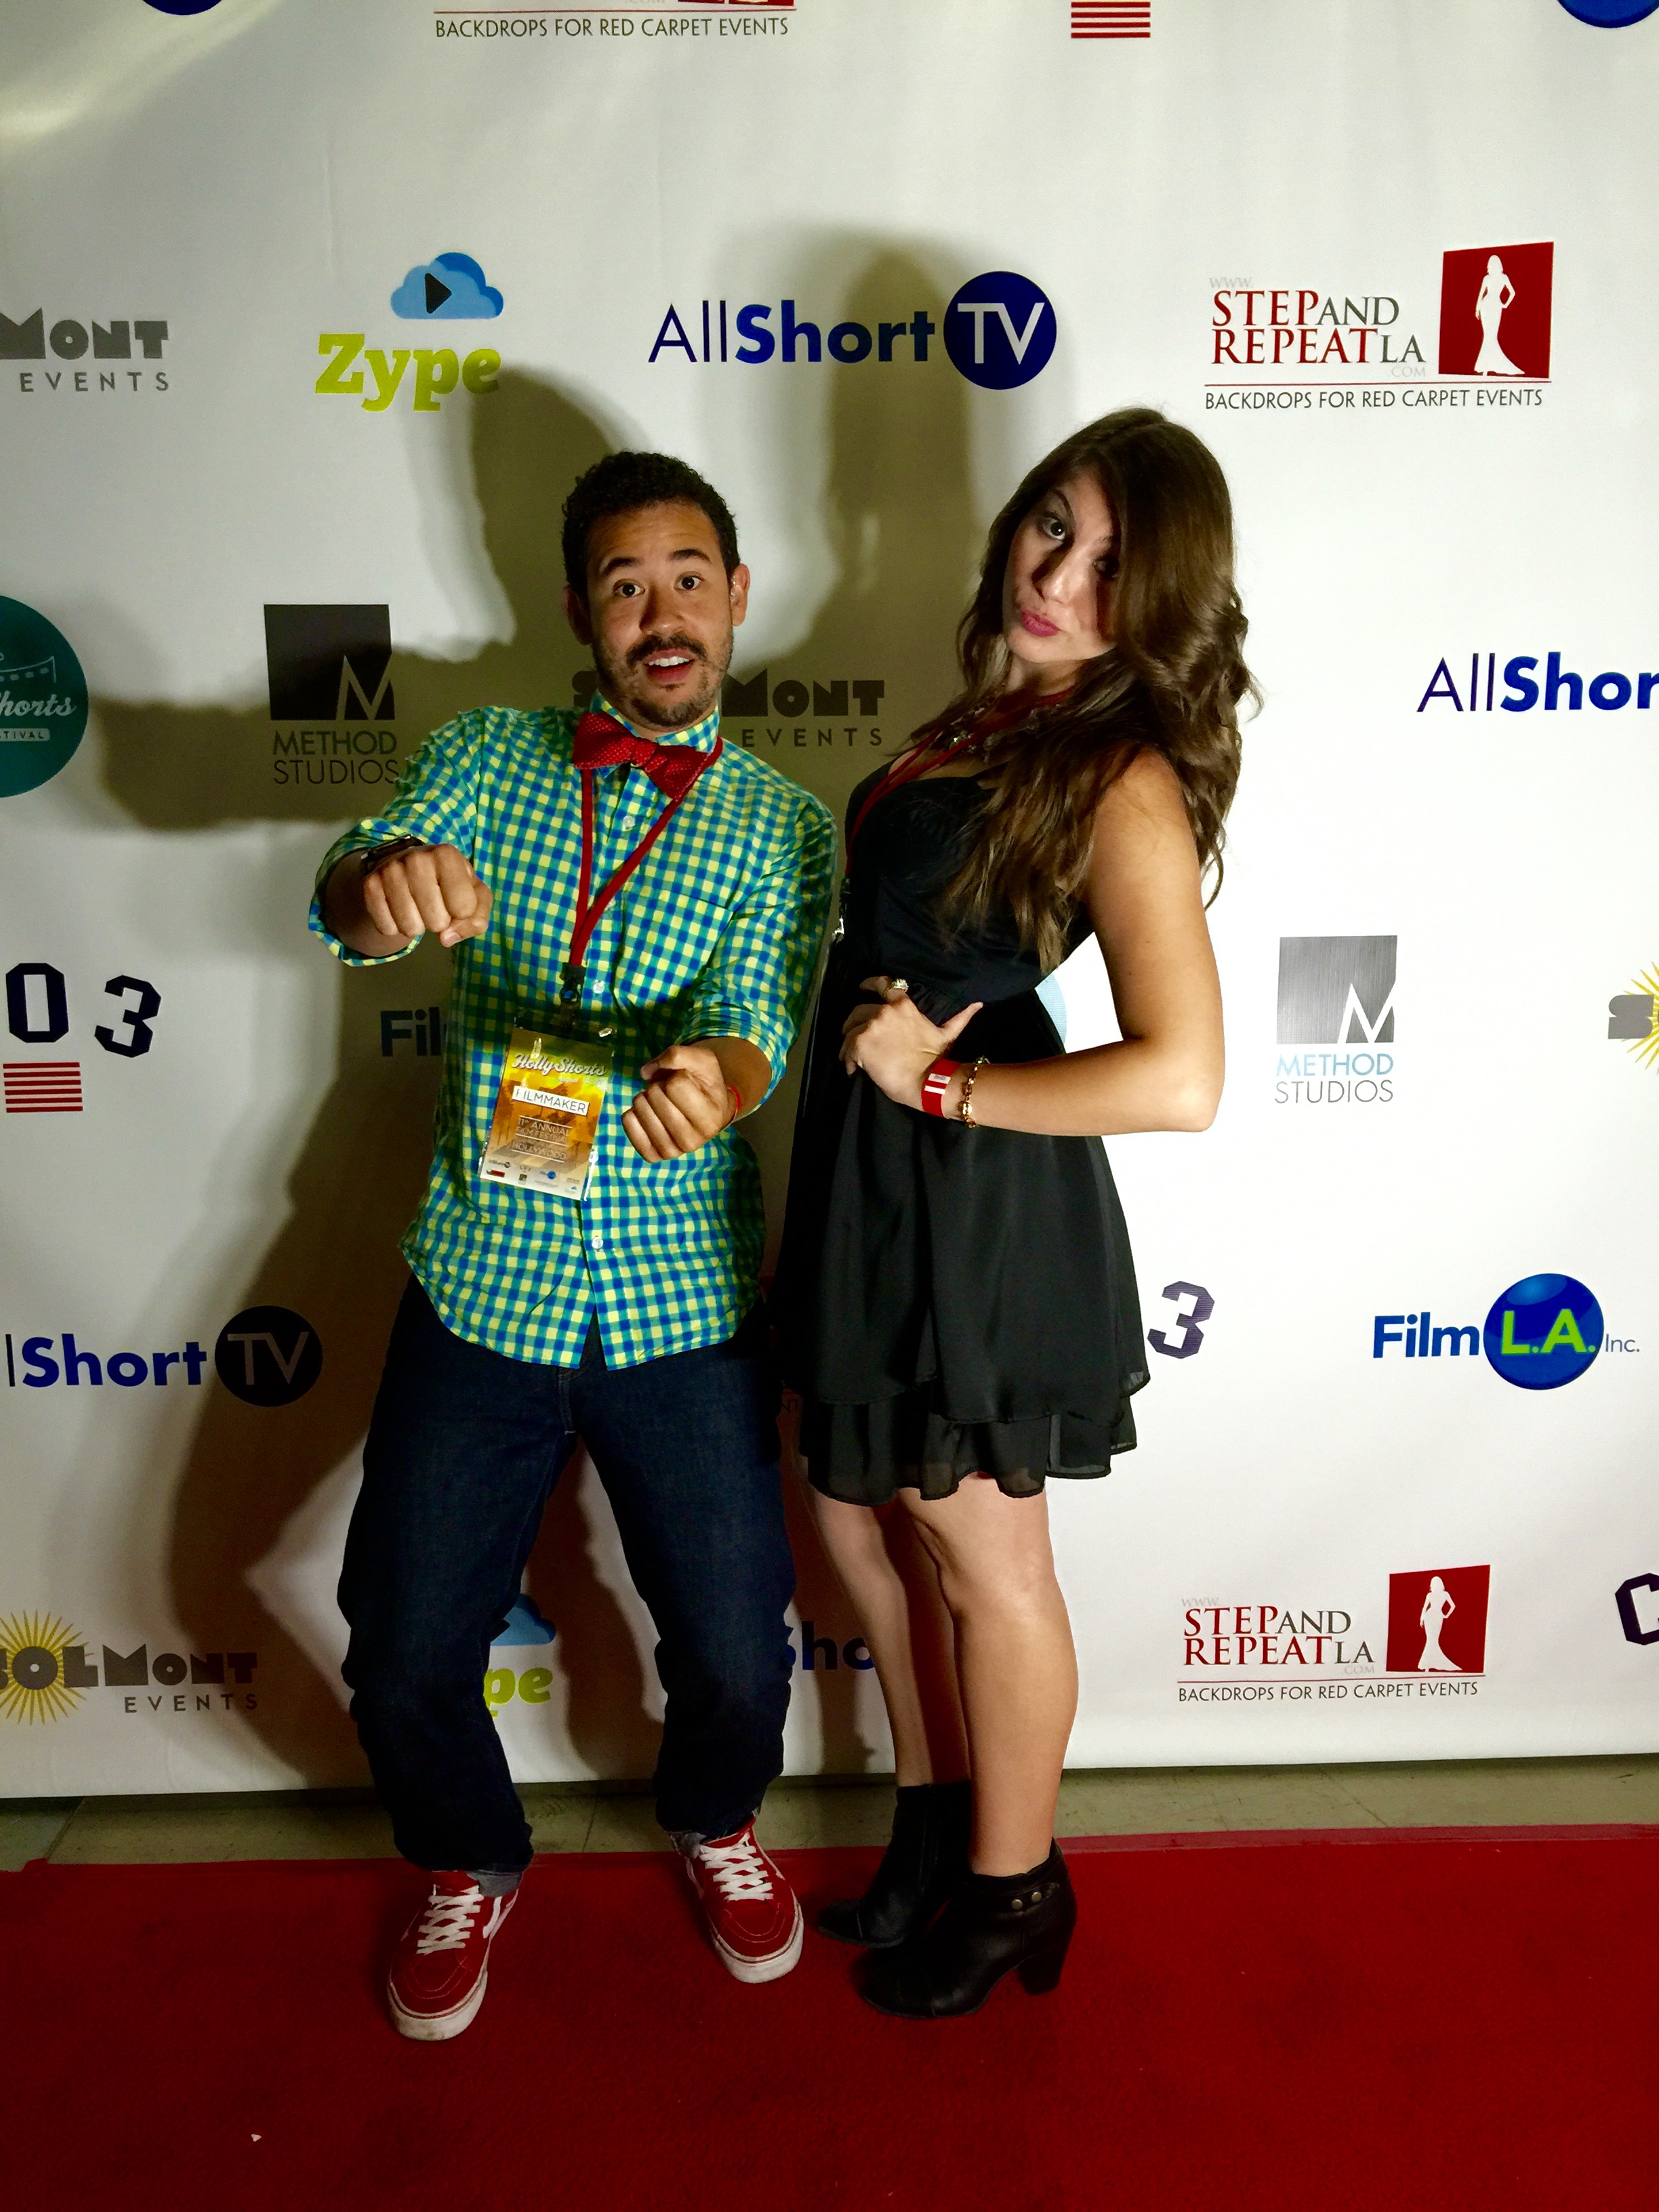 Dickie Hearts with co-star Amanda McDonough at the Hollyshorts Film Festival for their short film, 